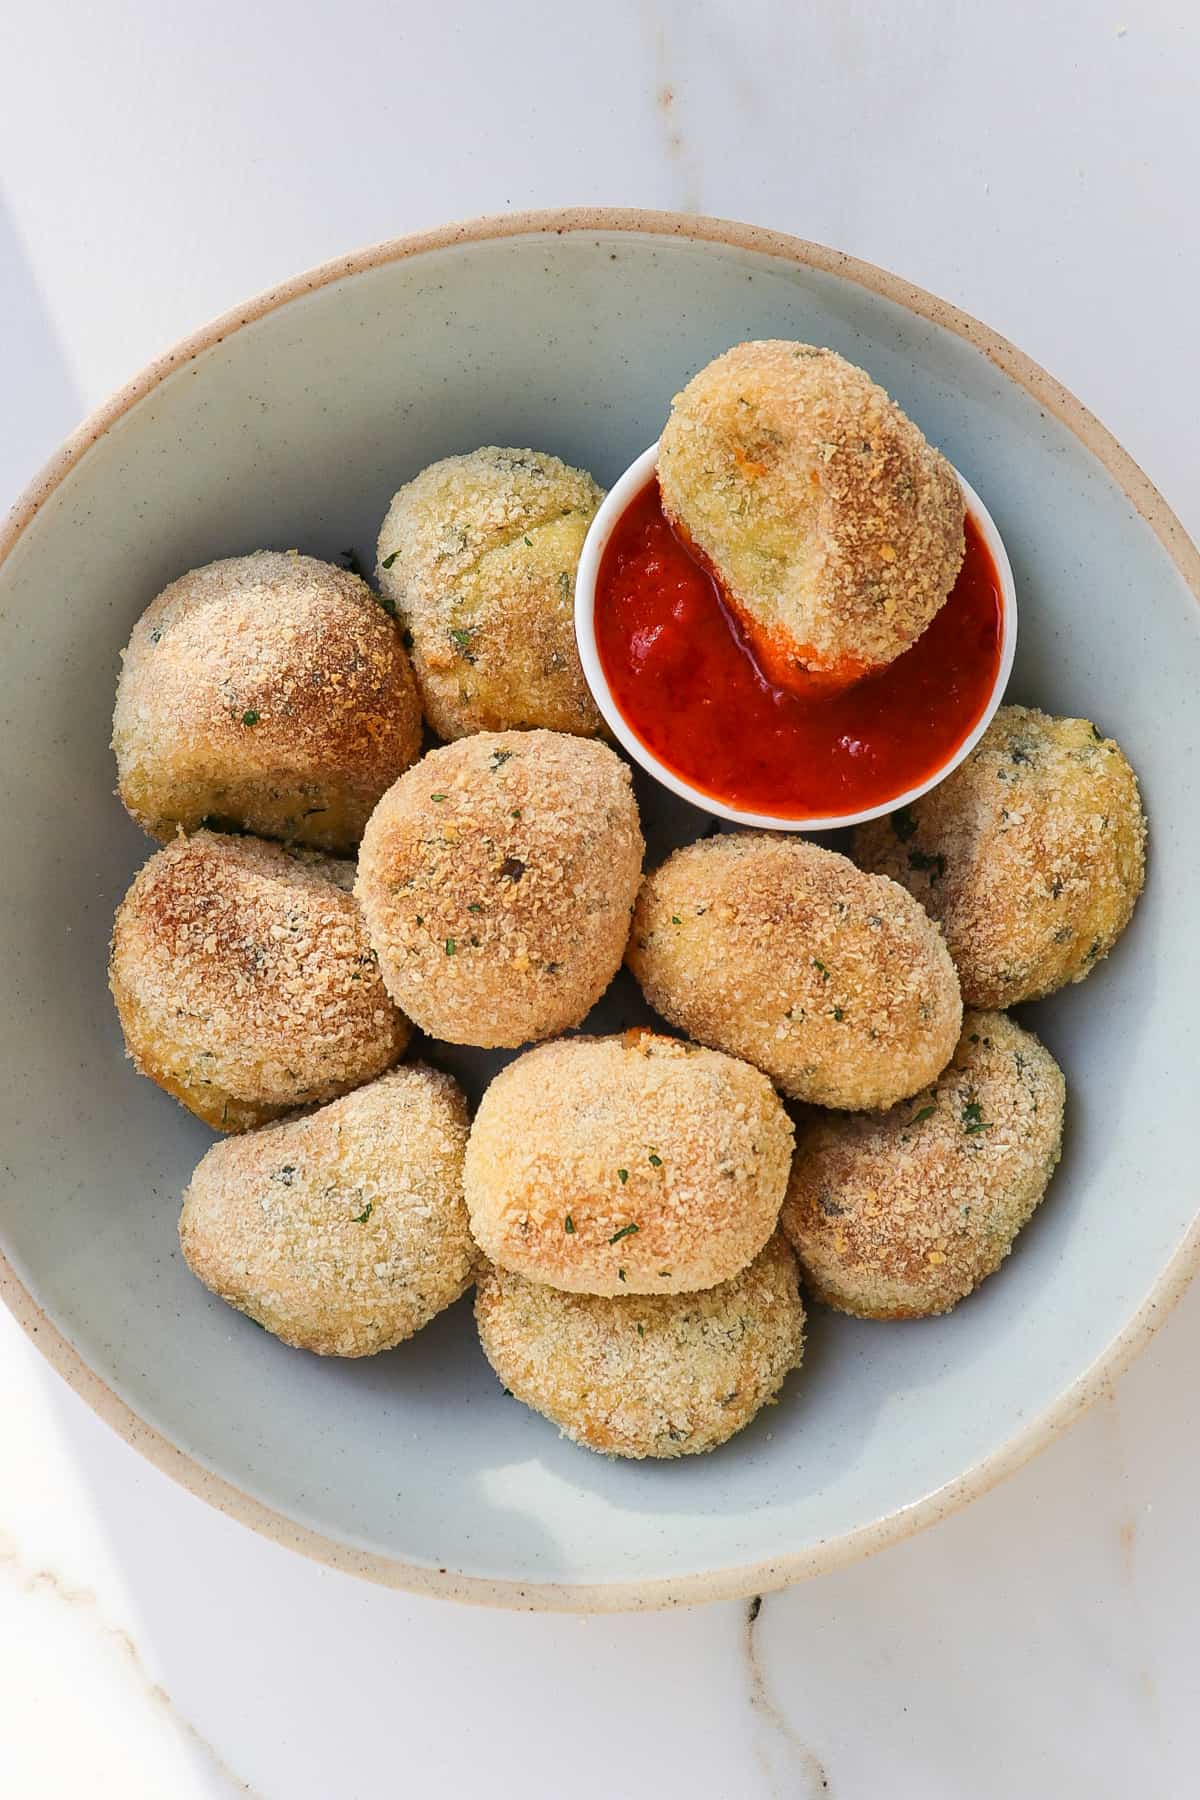 Potato croquettes in a bowl with one dipped in marinara sauce.